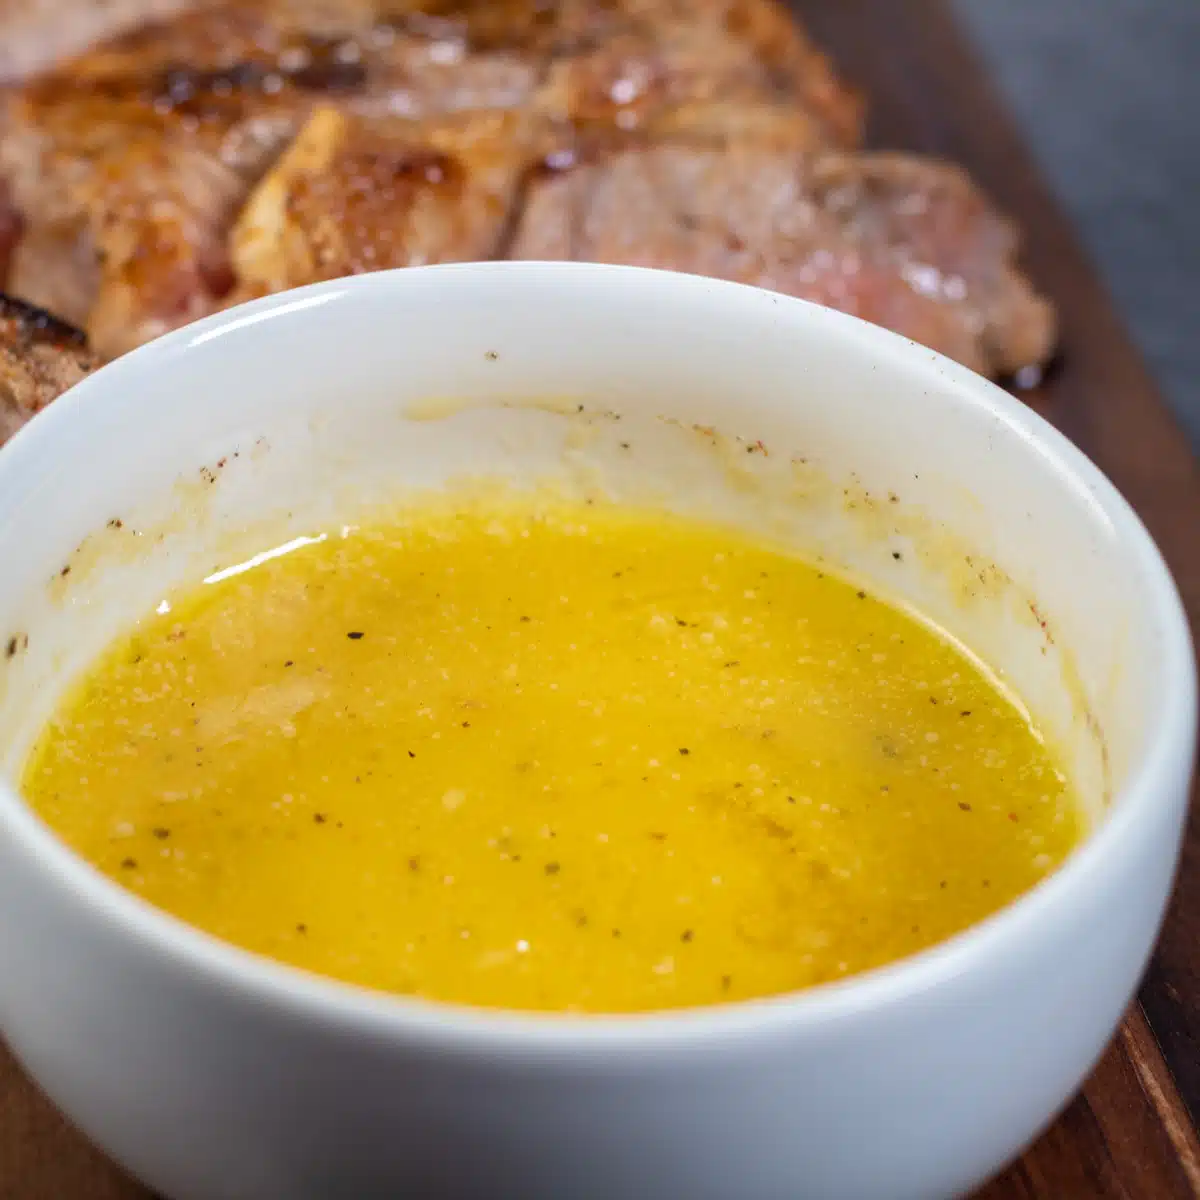 Square image of steak being dipped into garlic butter sauce.